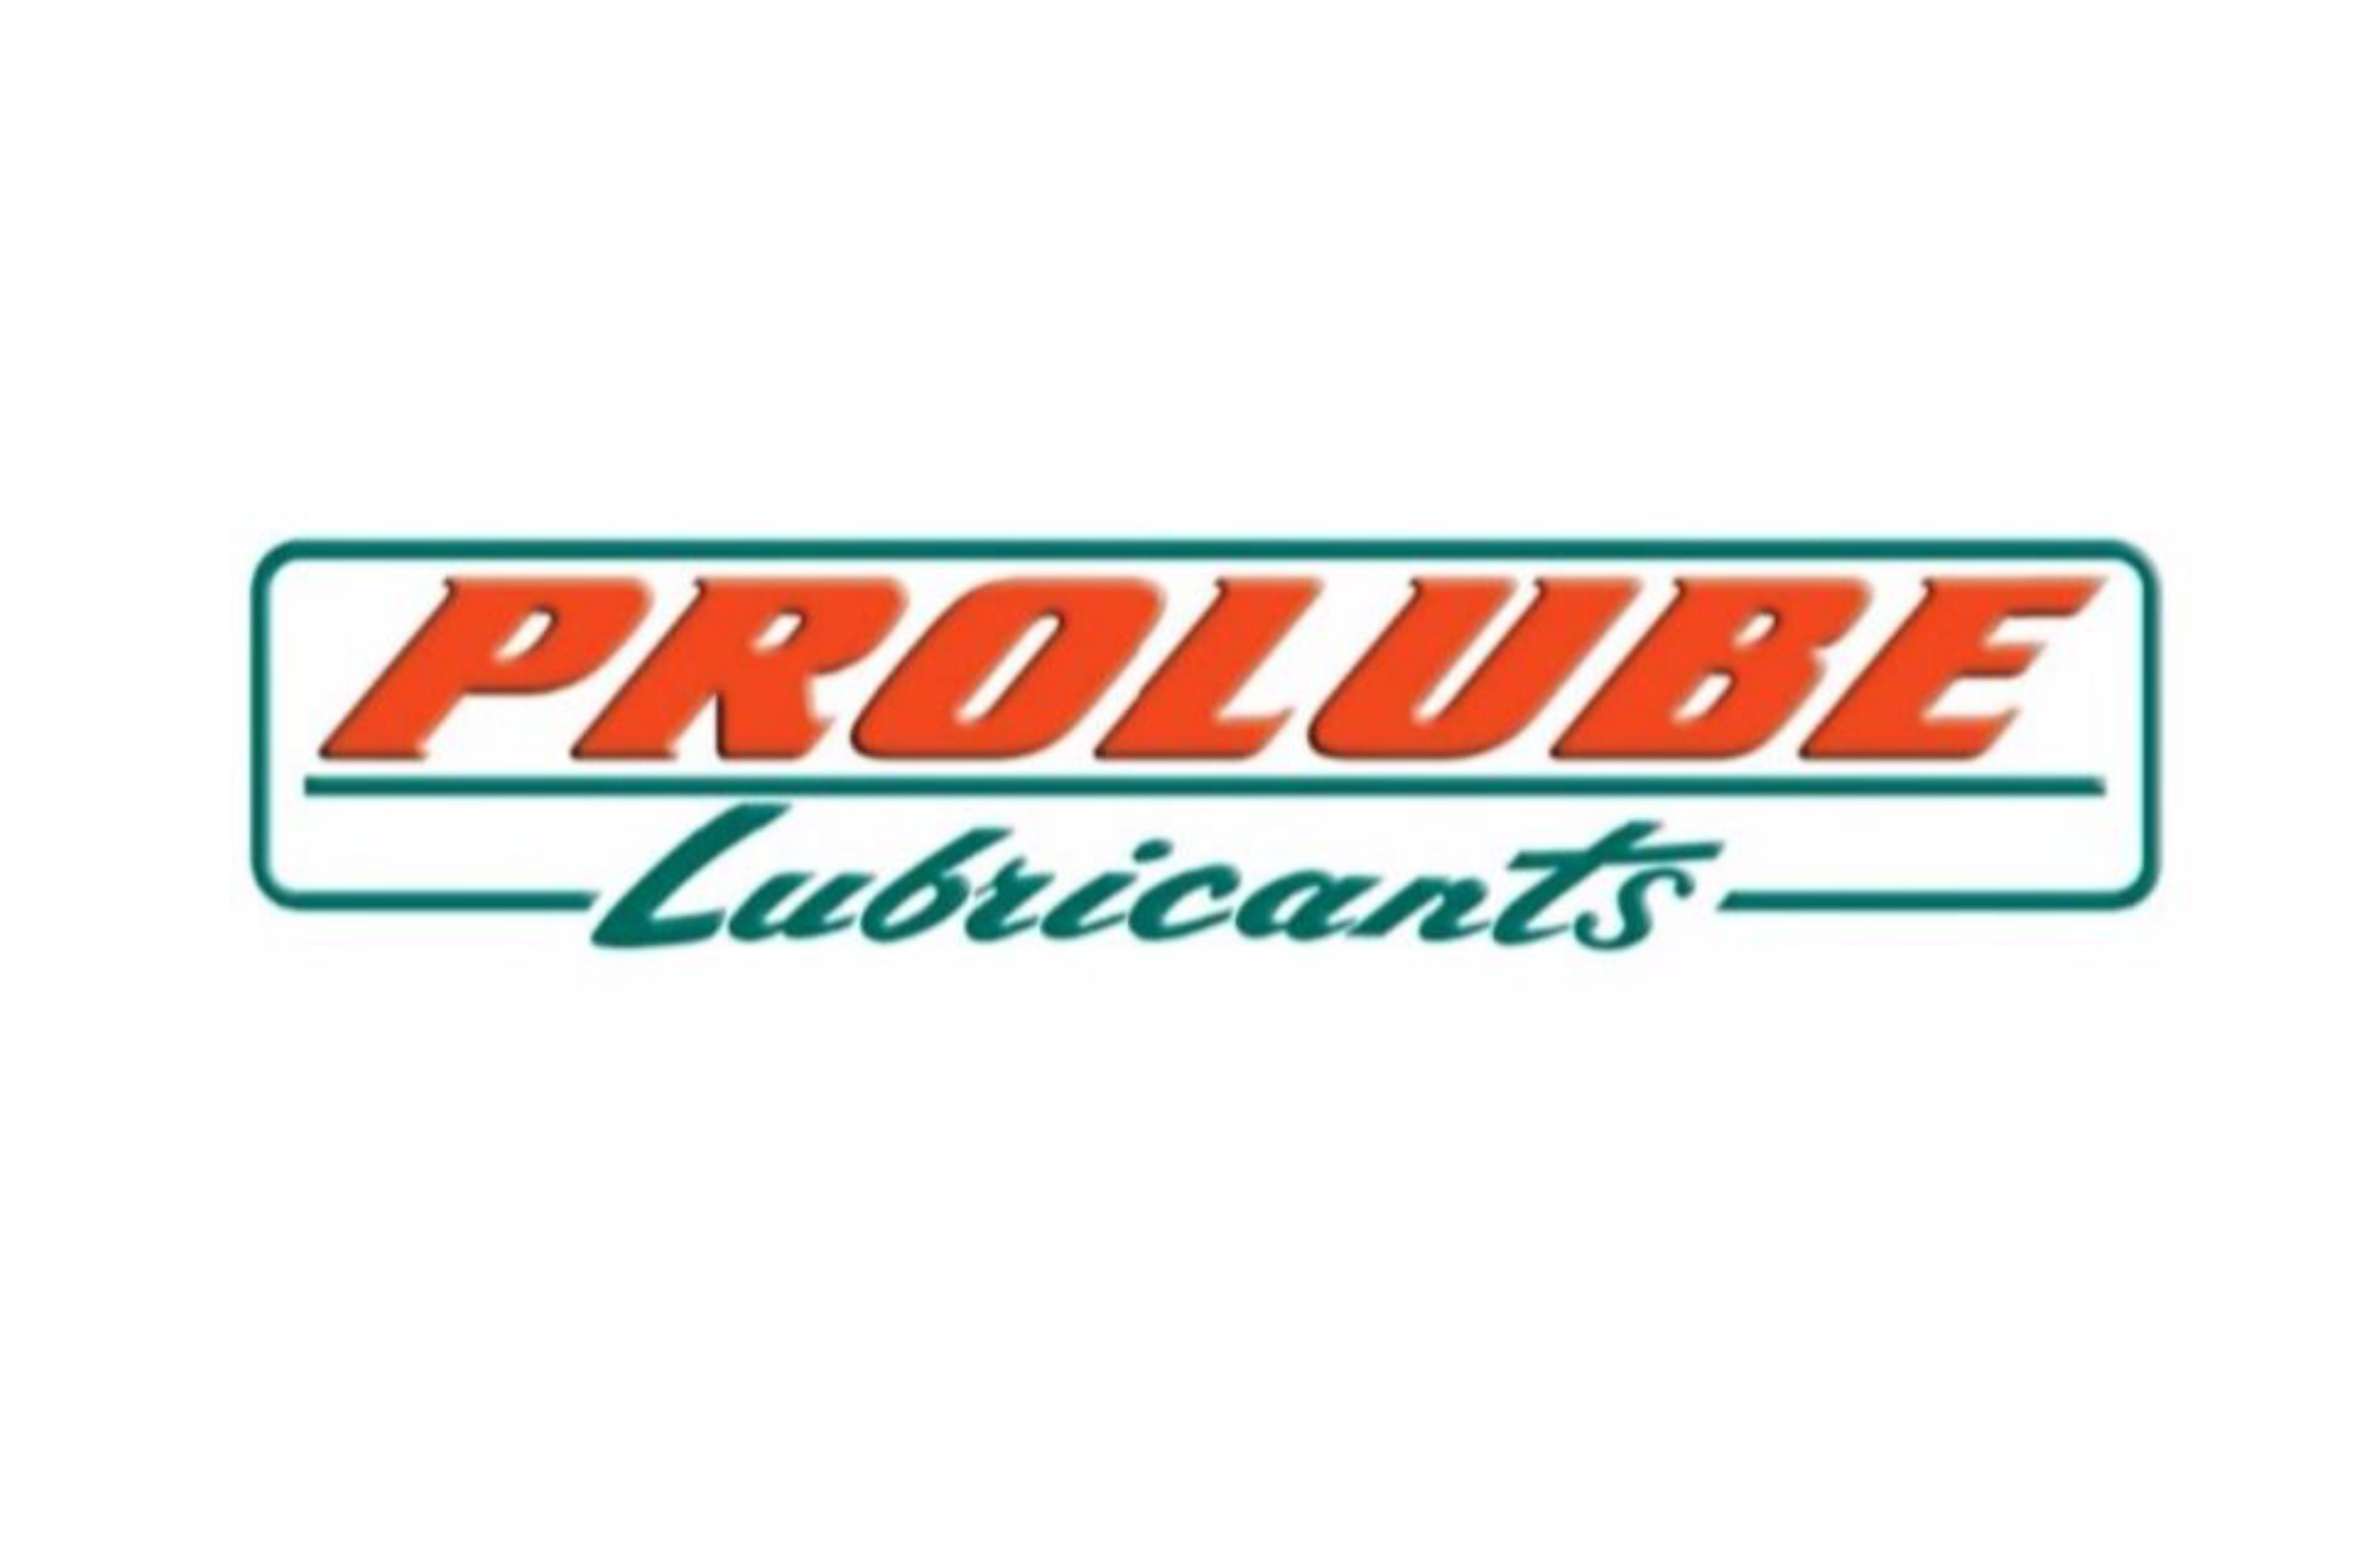 The brands PROLUBE LUBRICANTS